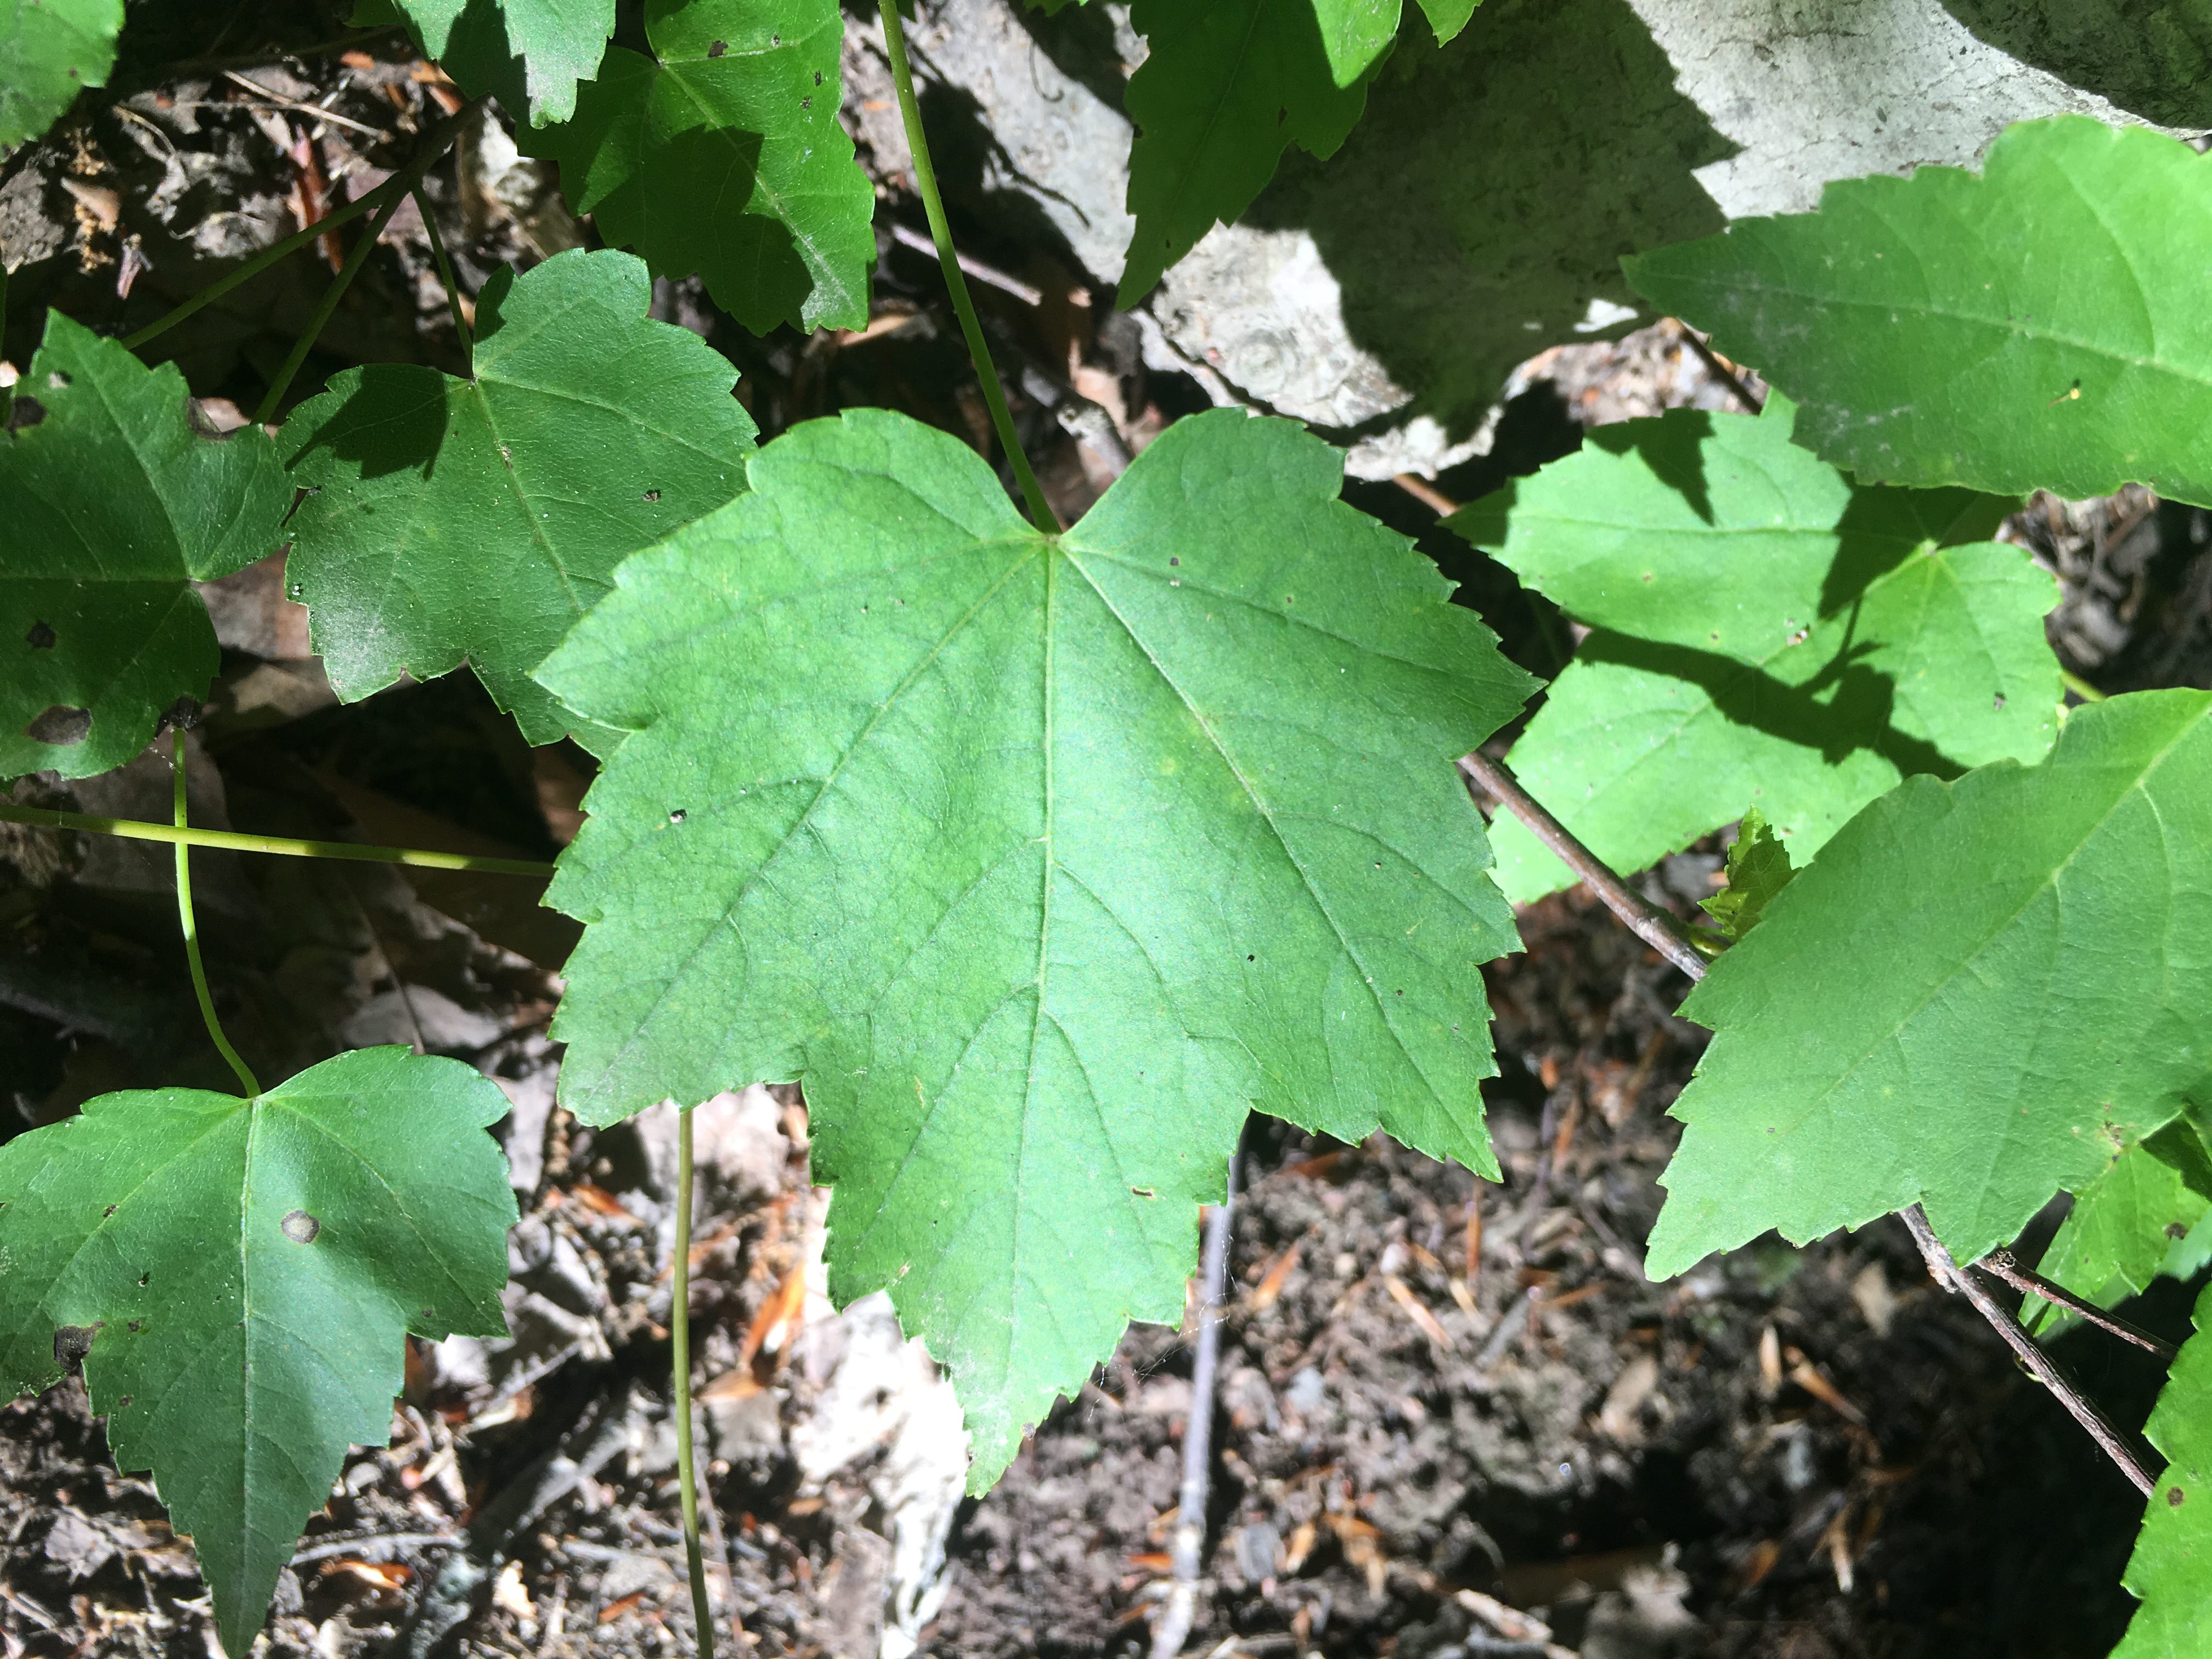 An example of green leaves.